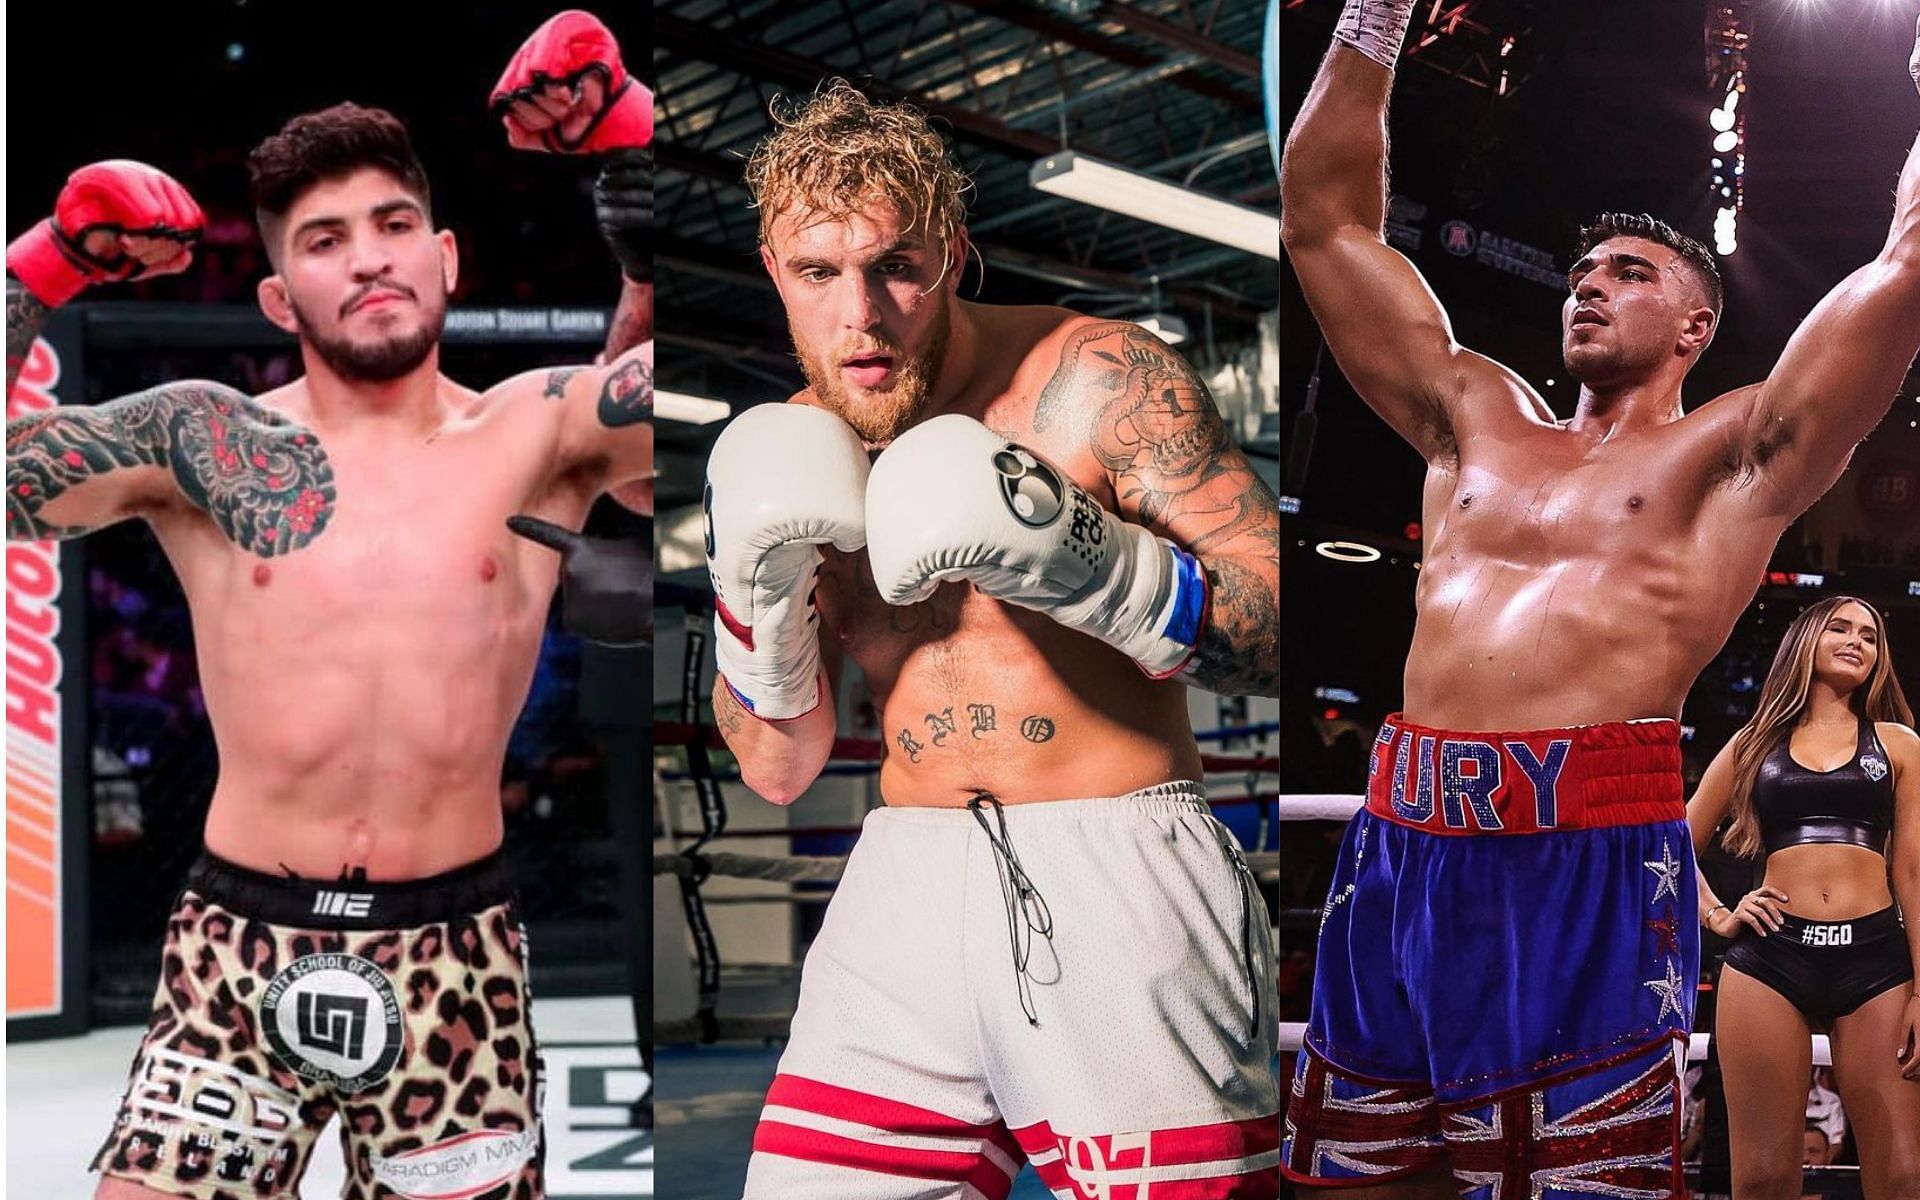 Dillon Danis (left), Jake Paul (middle), Tommy Fury (right) [Images courtesy: @dillondanis, @jakepaul, and @tommyfury via Instagram]